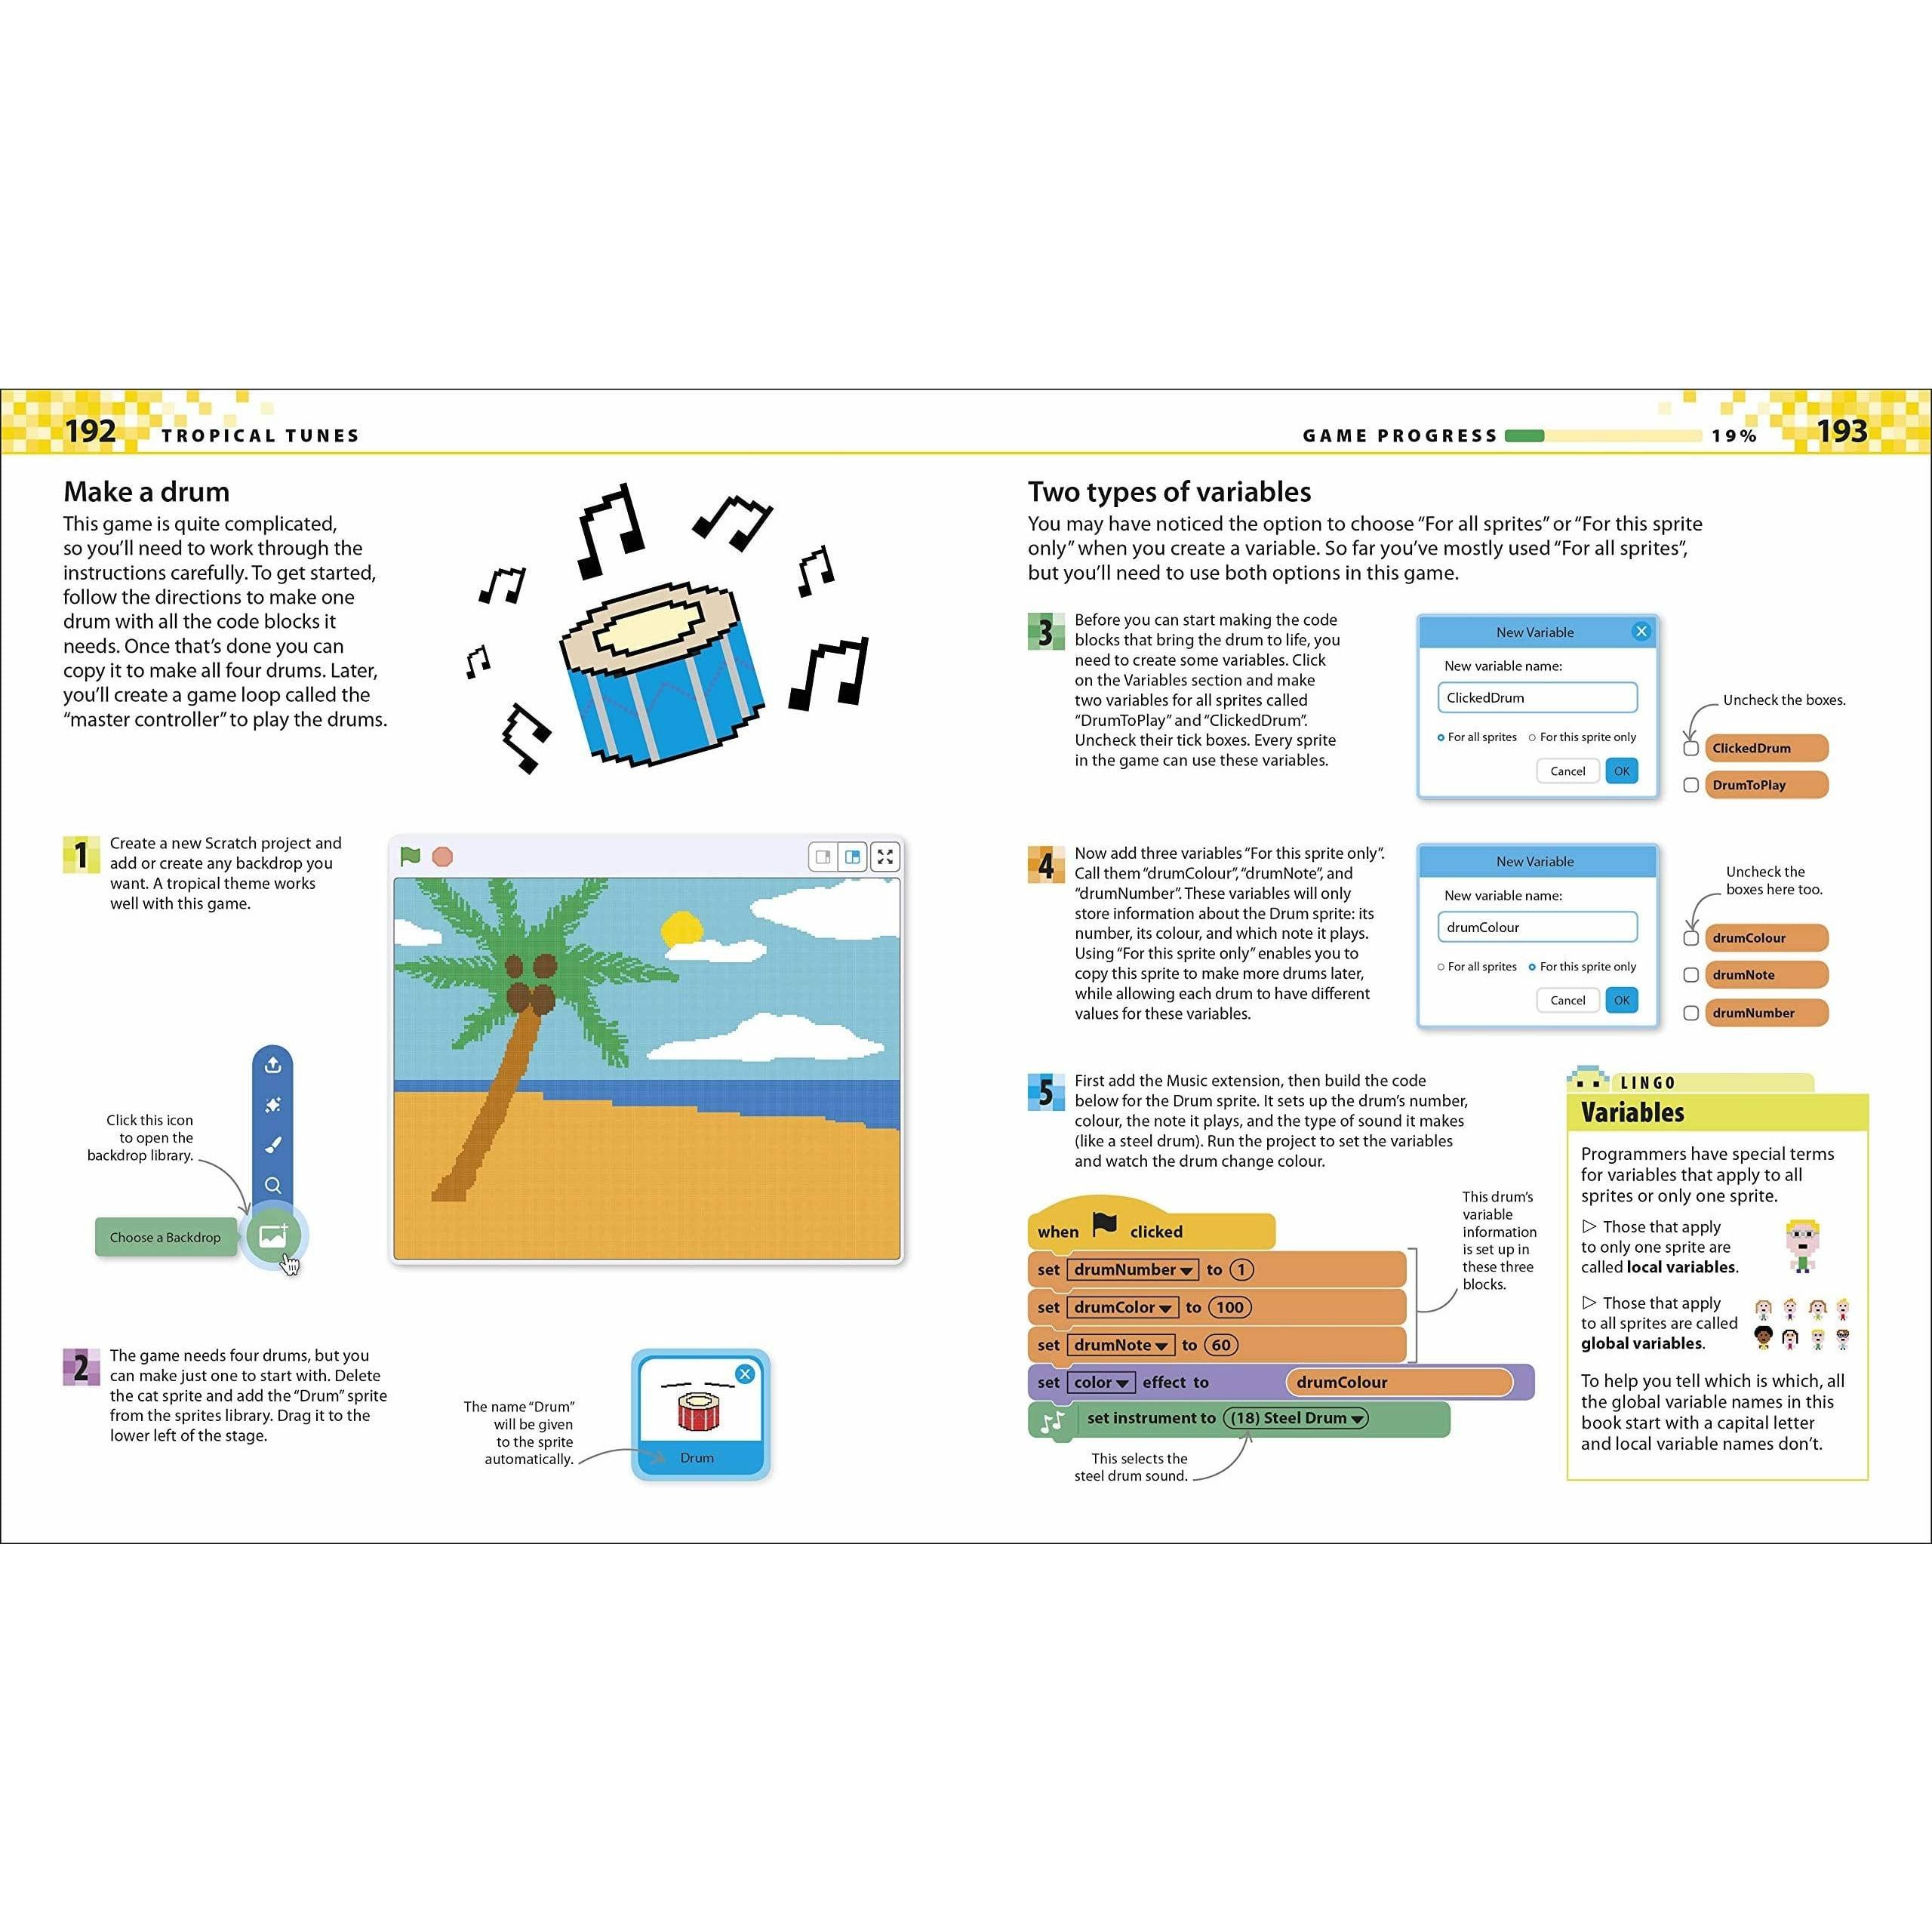 Coding Games in Scratch: A Step-by-Step Visual Guide to Building Your Own Computer Games (Computer Coding for Kids) - MakoStars Online Store